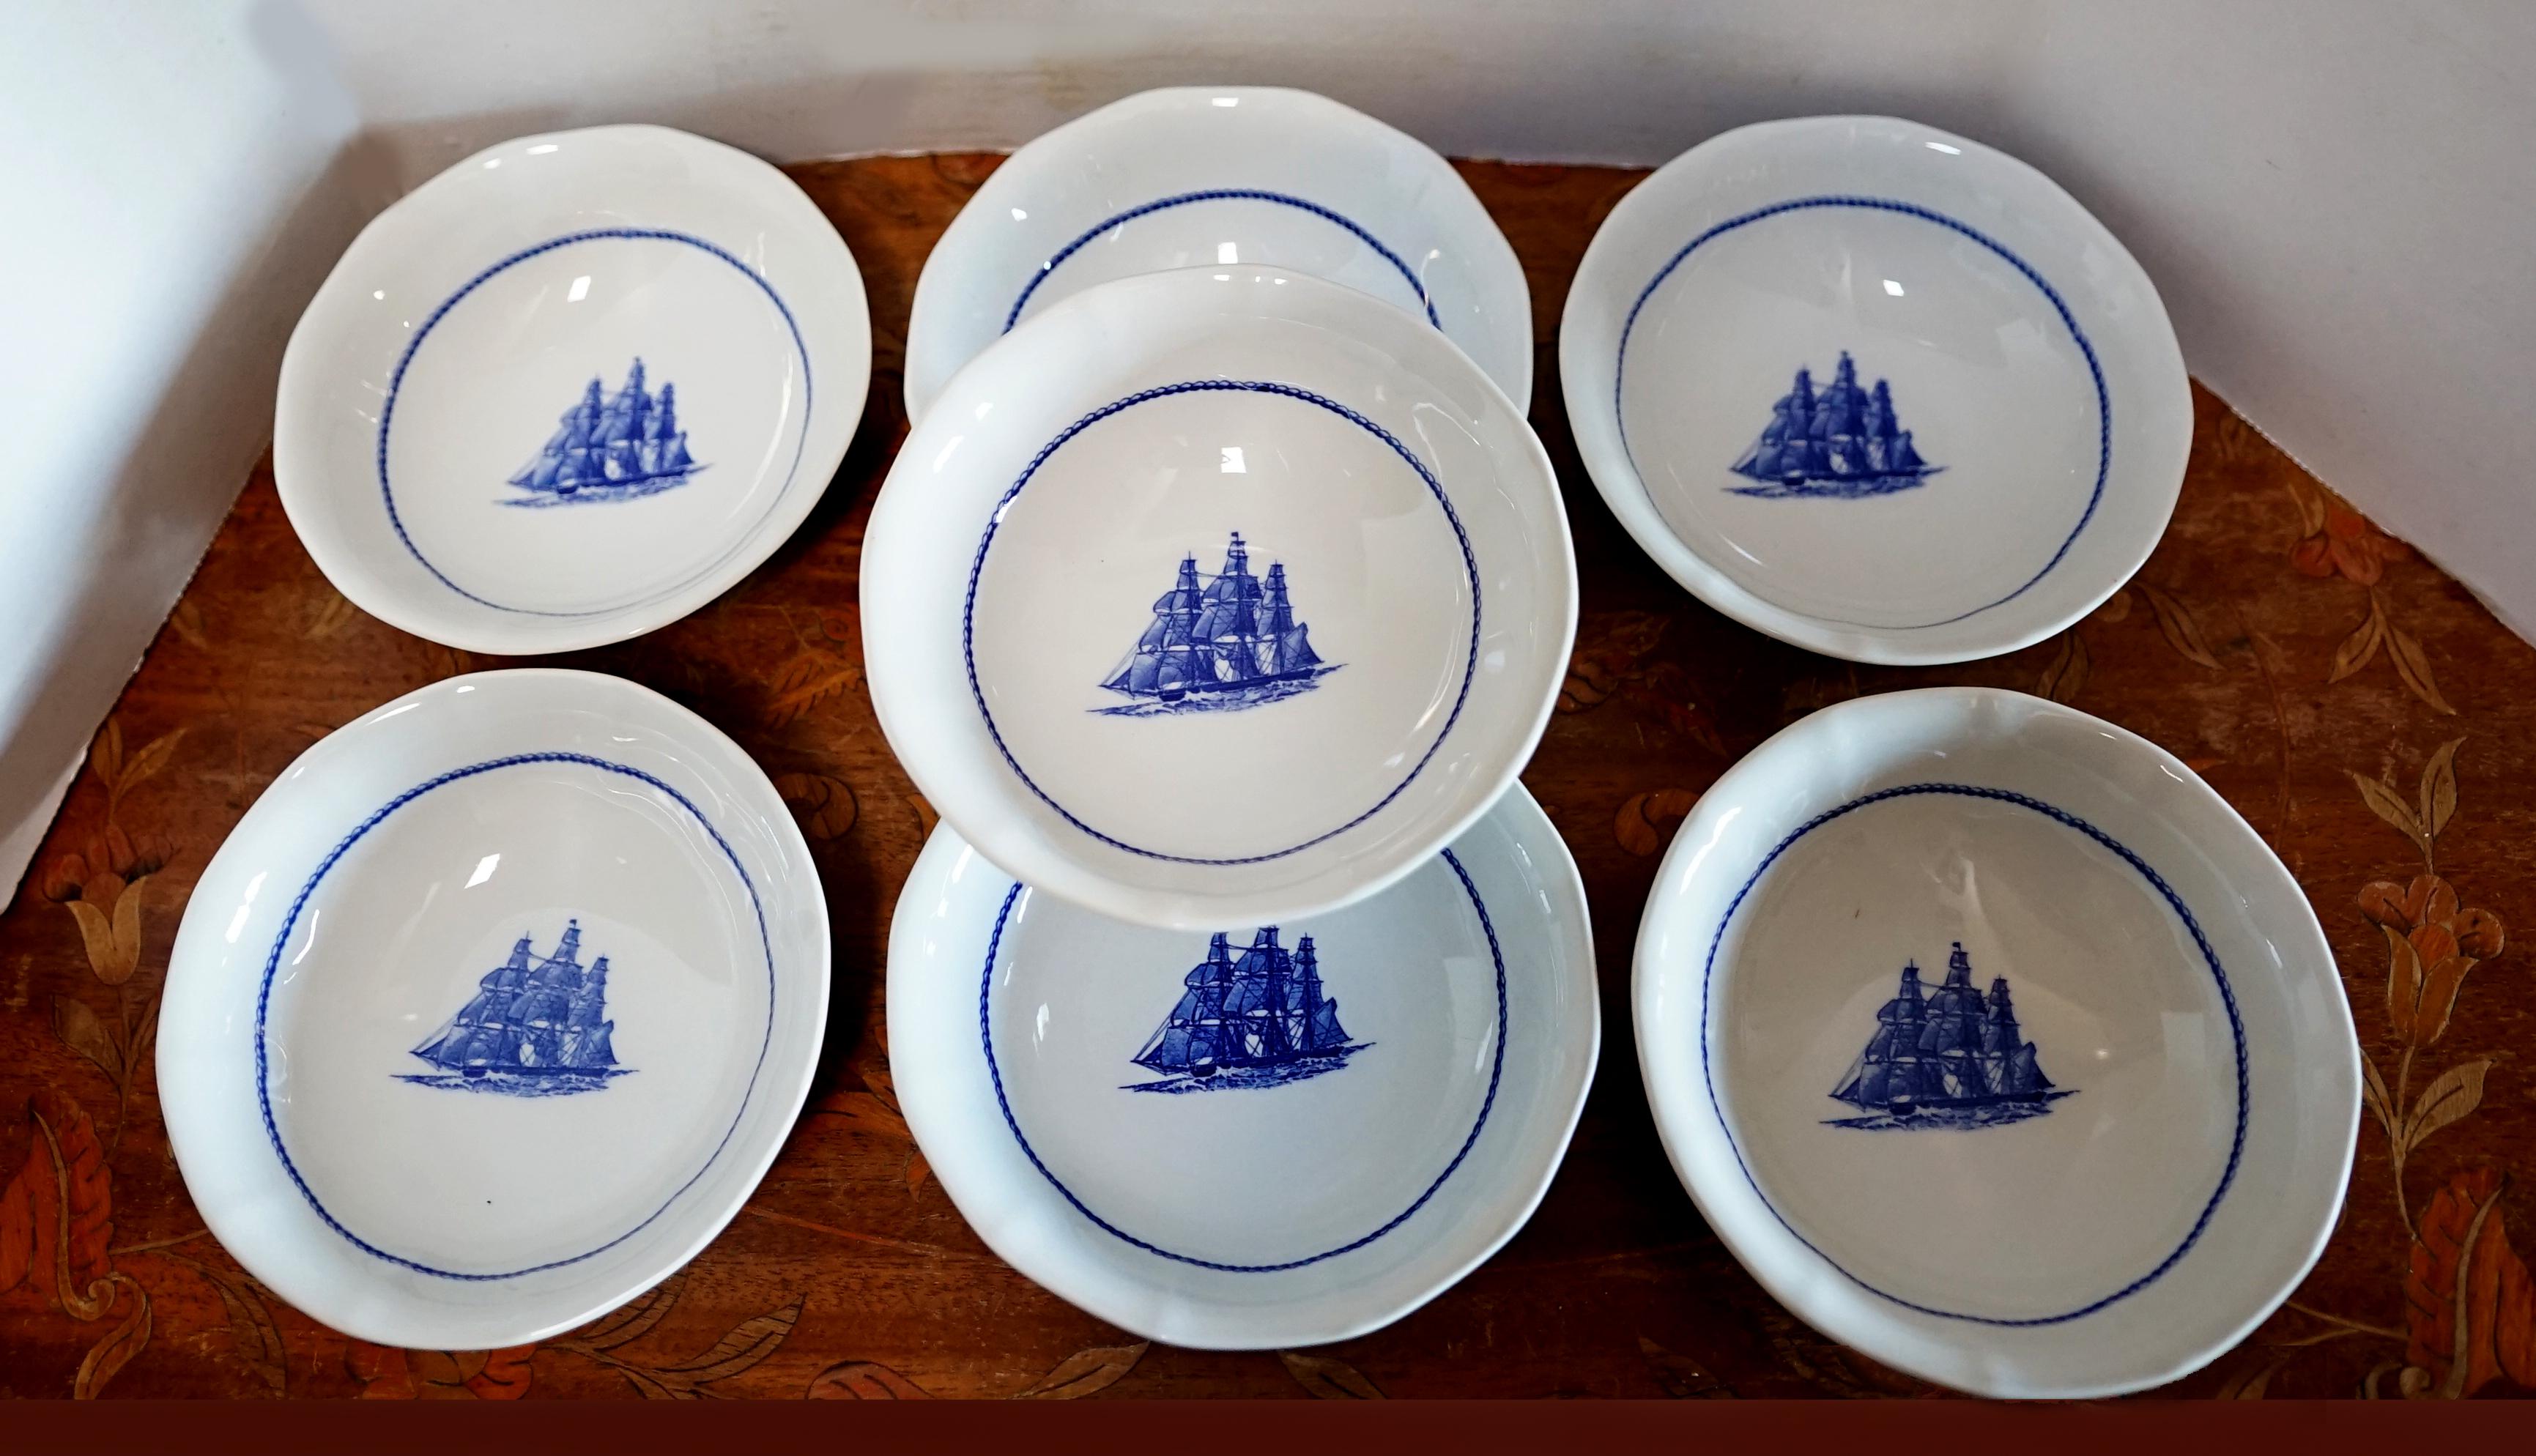 This is a beautiful set of Wedgwood American Clipper in navy blue and white. Classic and crisp with the iconic, three masted  clipper ship as the main motif, the plates, bowls, serving items and cups and saucers are highly collectible. This set will